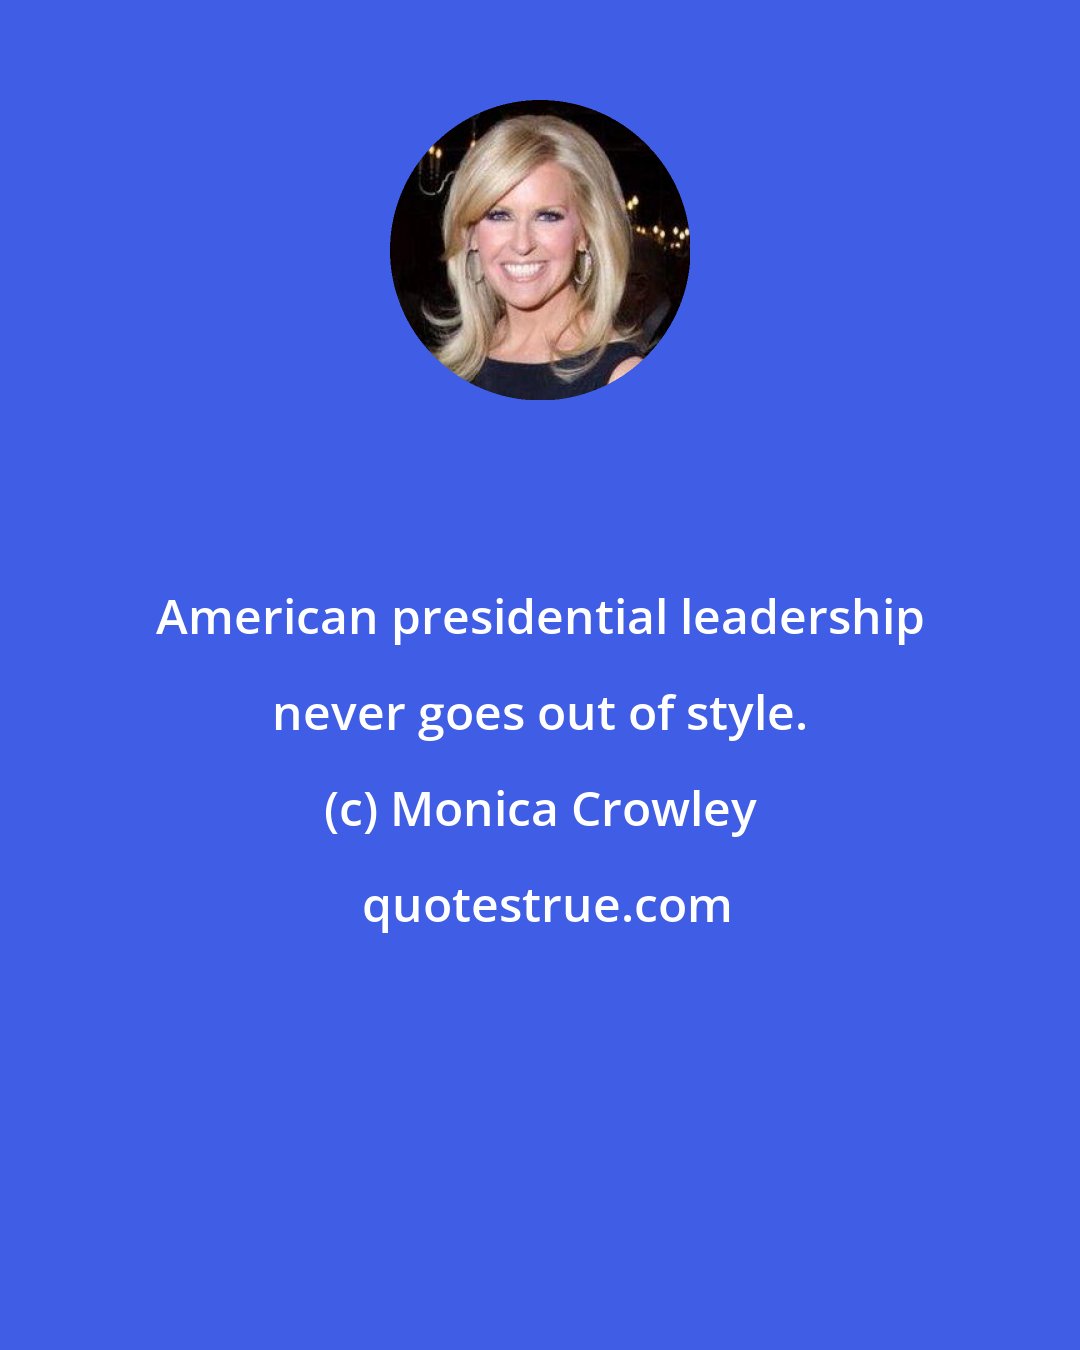 Monica Crowley: American presidential leadership never goes out of style.